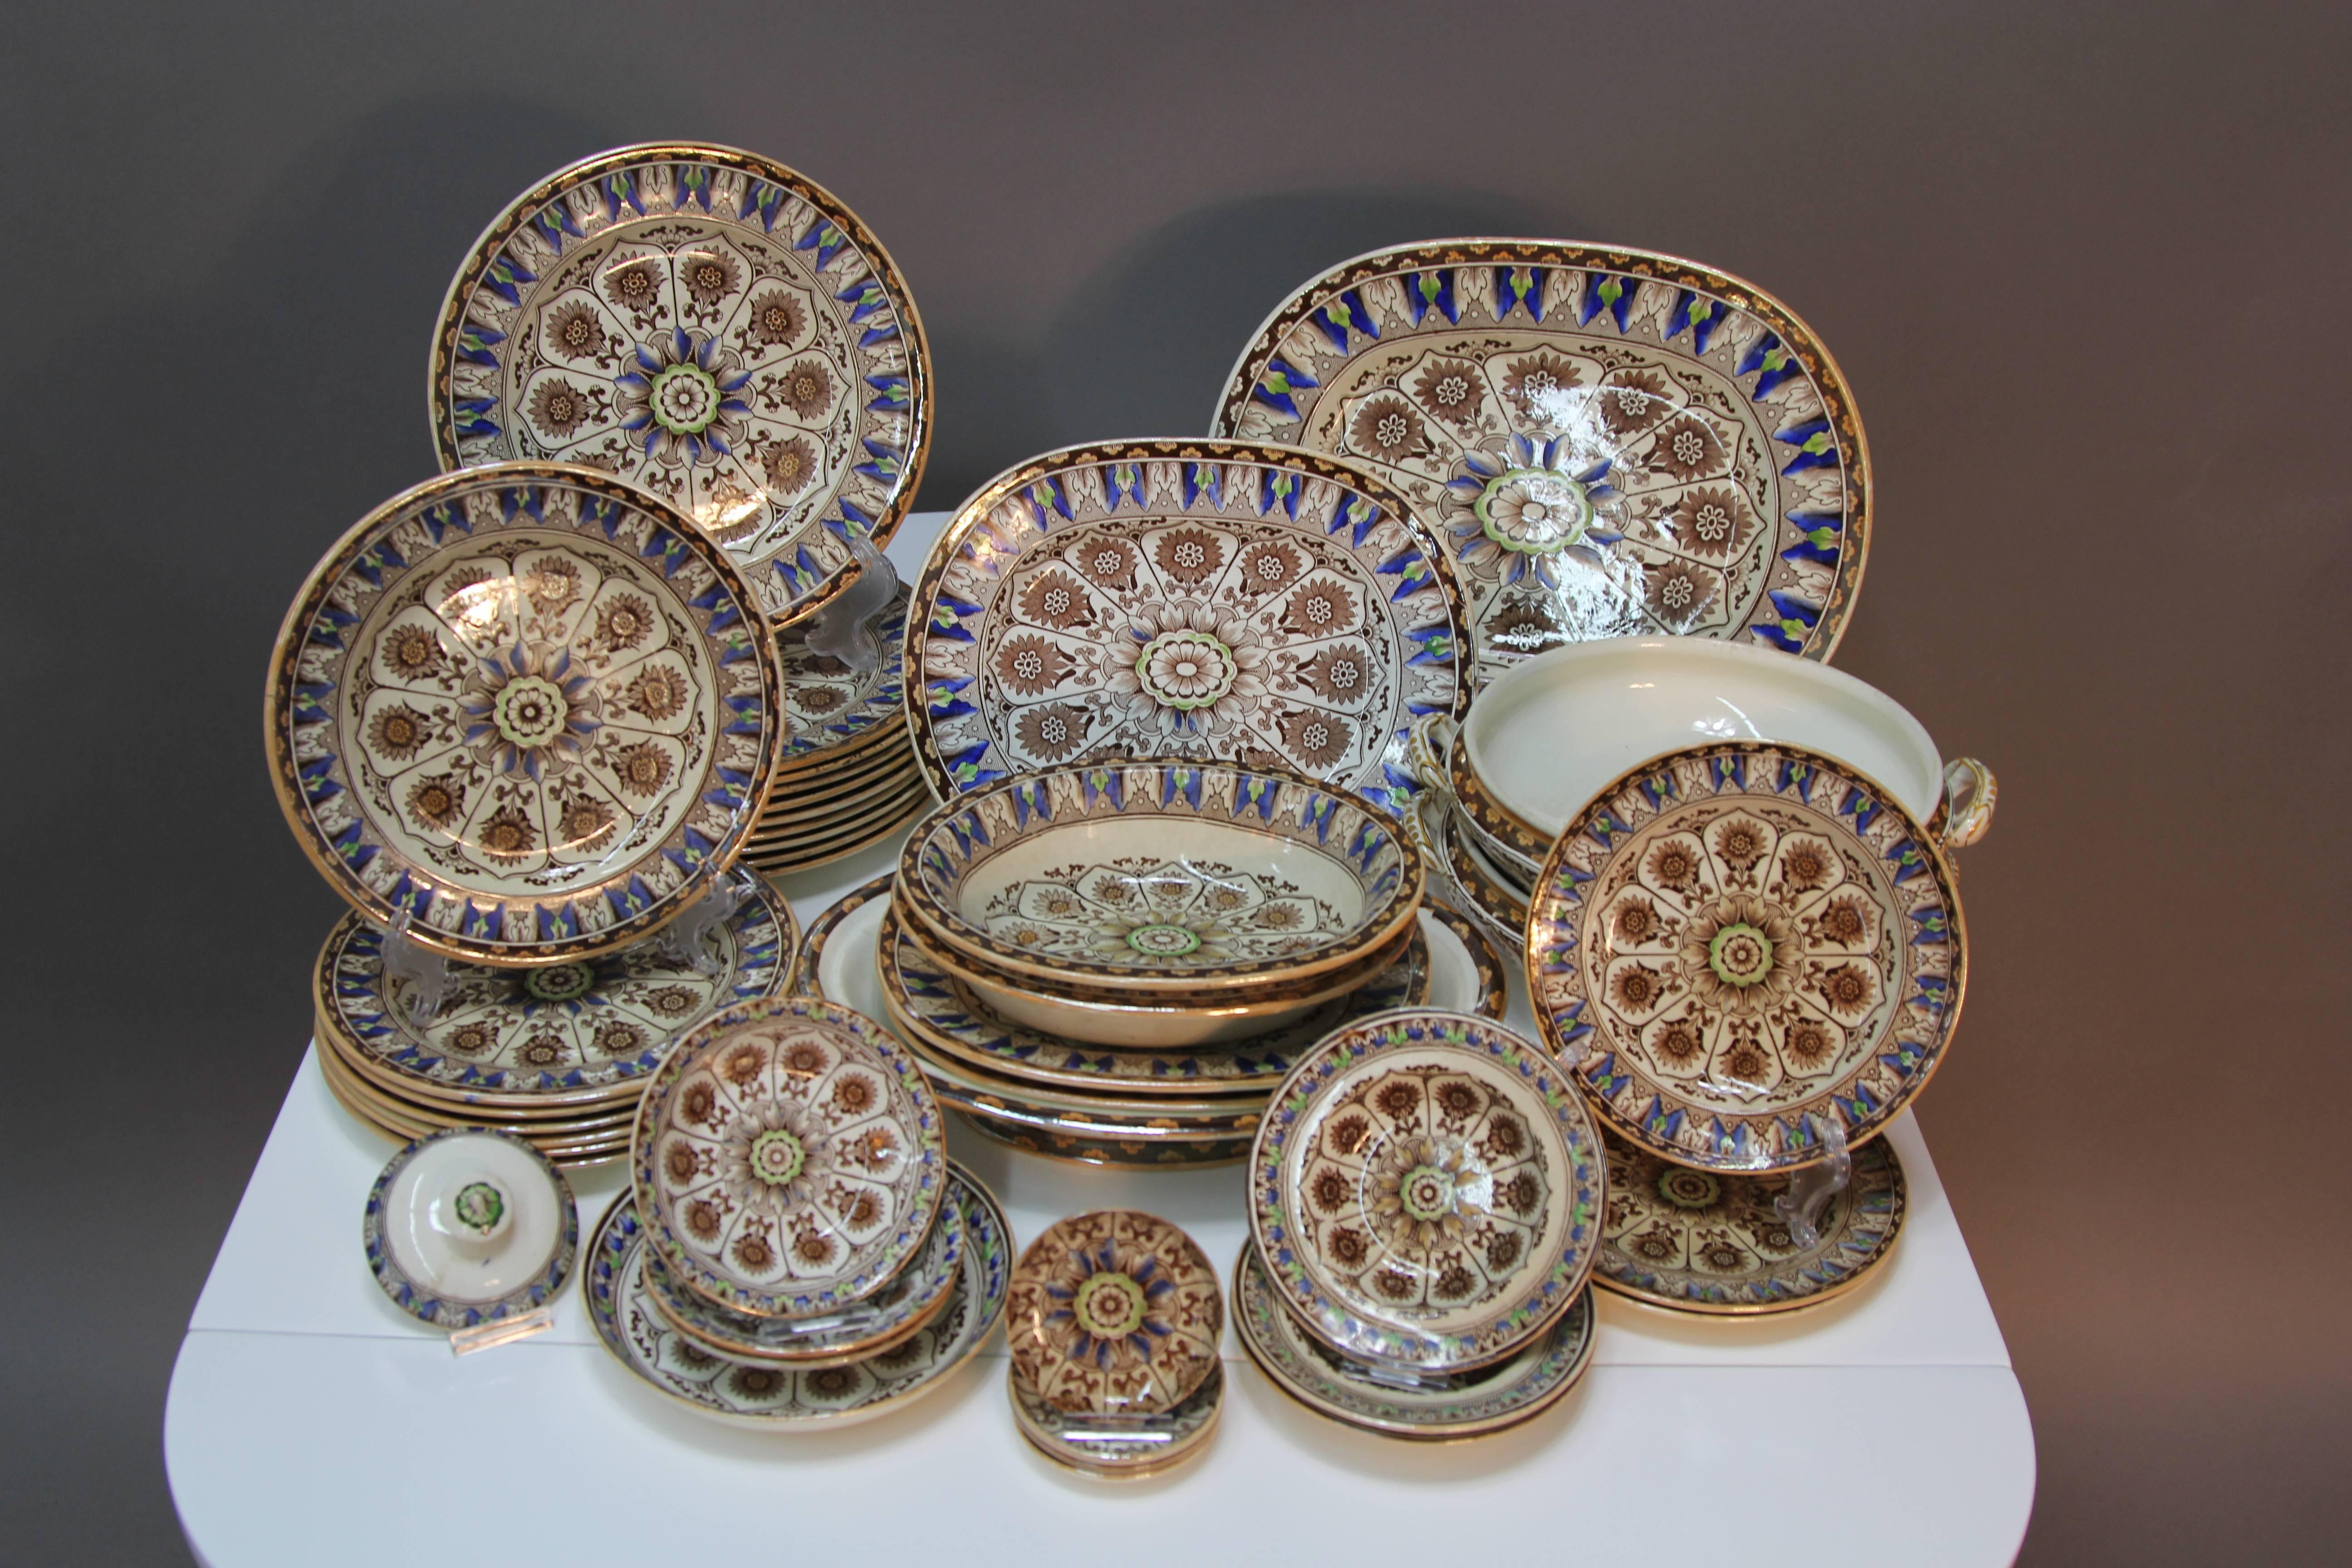 William Brownfield & Sons, Cyprus pattern China including oval platters, dinner plates, desert plates, tureens and miscellaneous small plates. Various marked, some impressed and some say "trade mark." An excellent example of Victorian